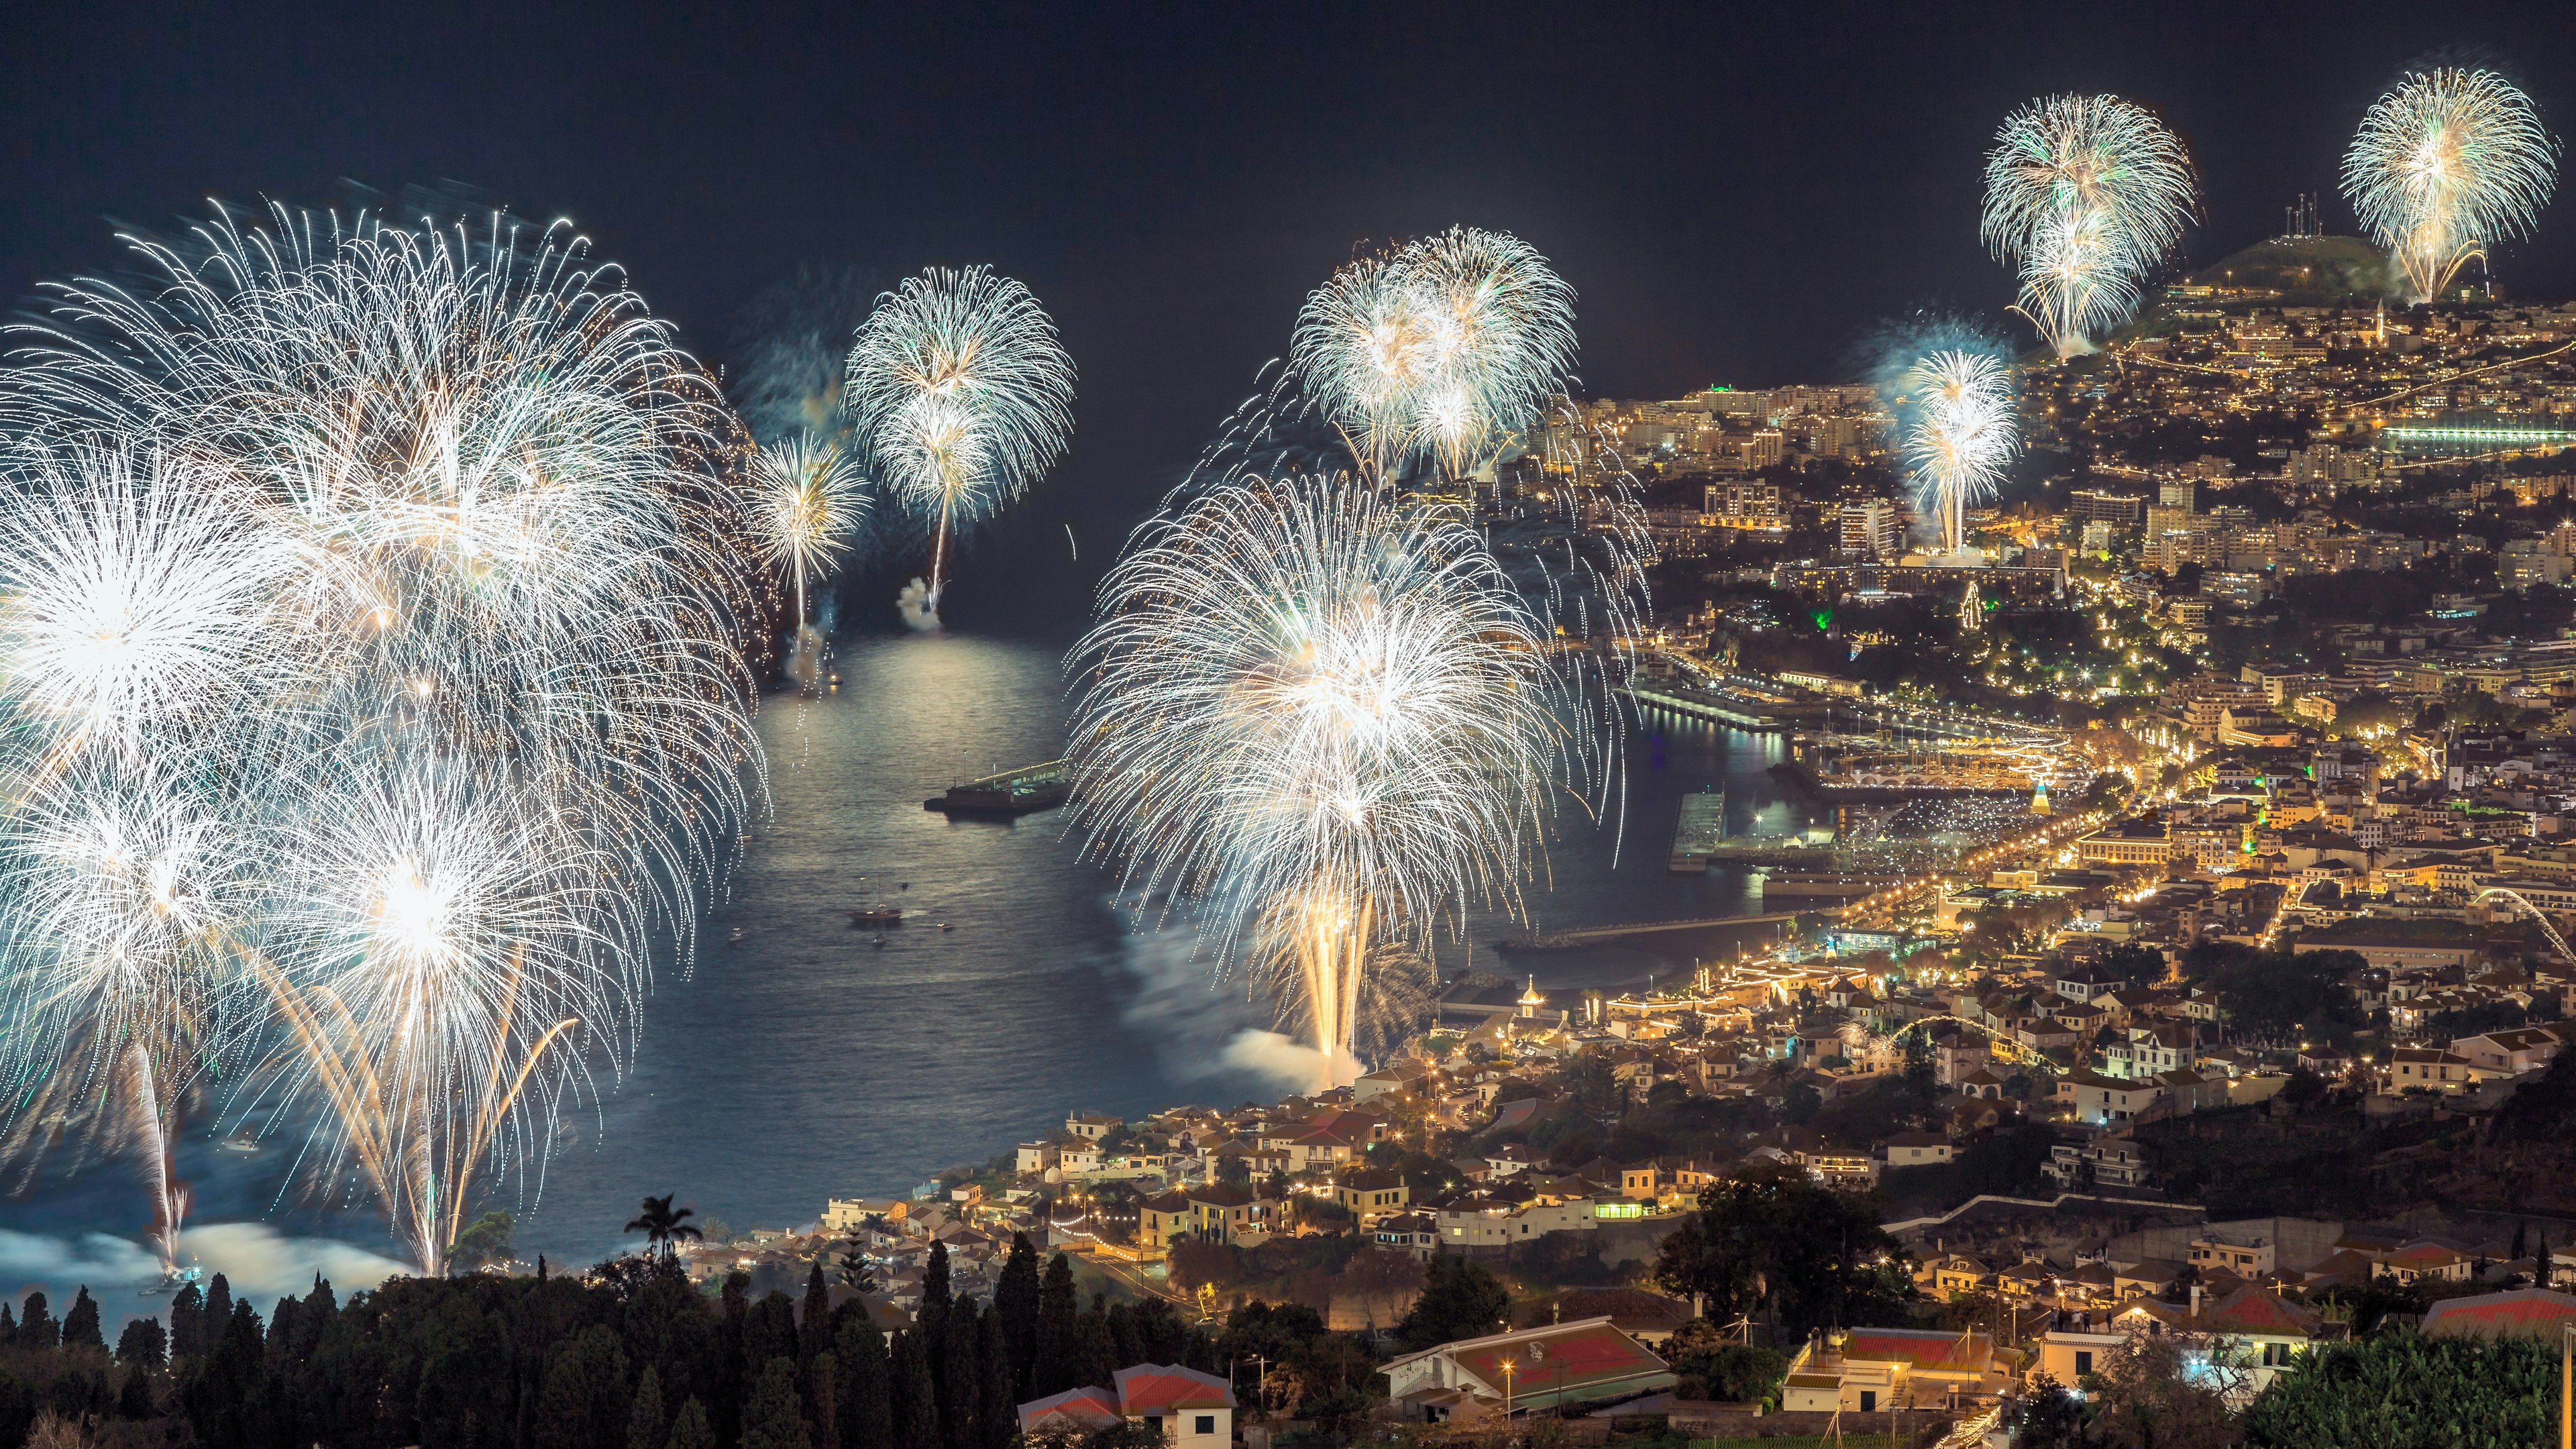 Dark night and fireworks in the sky over a beach in Madeira